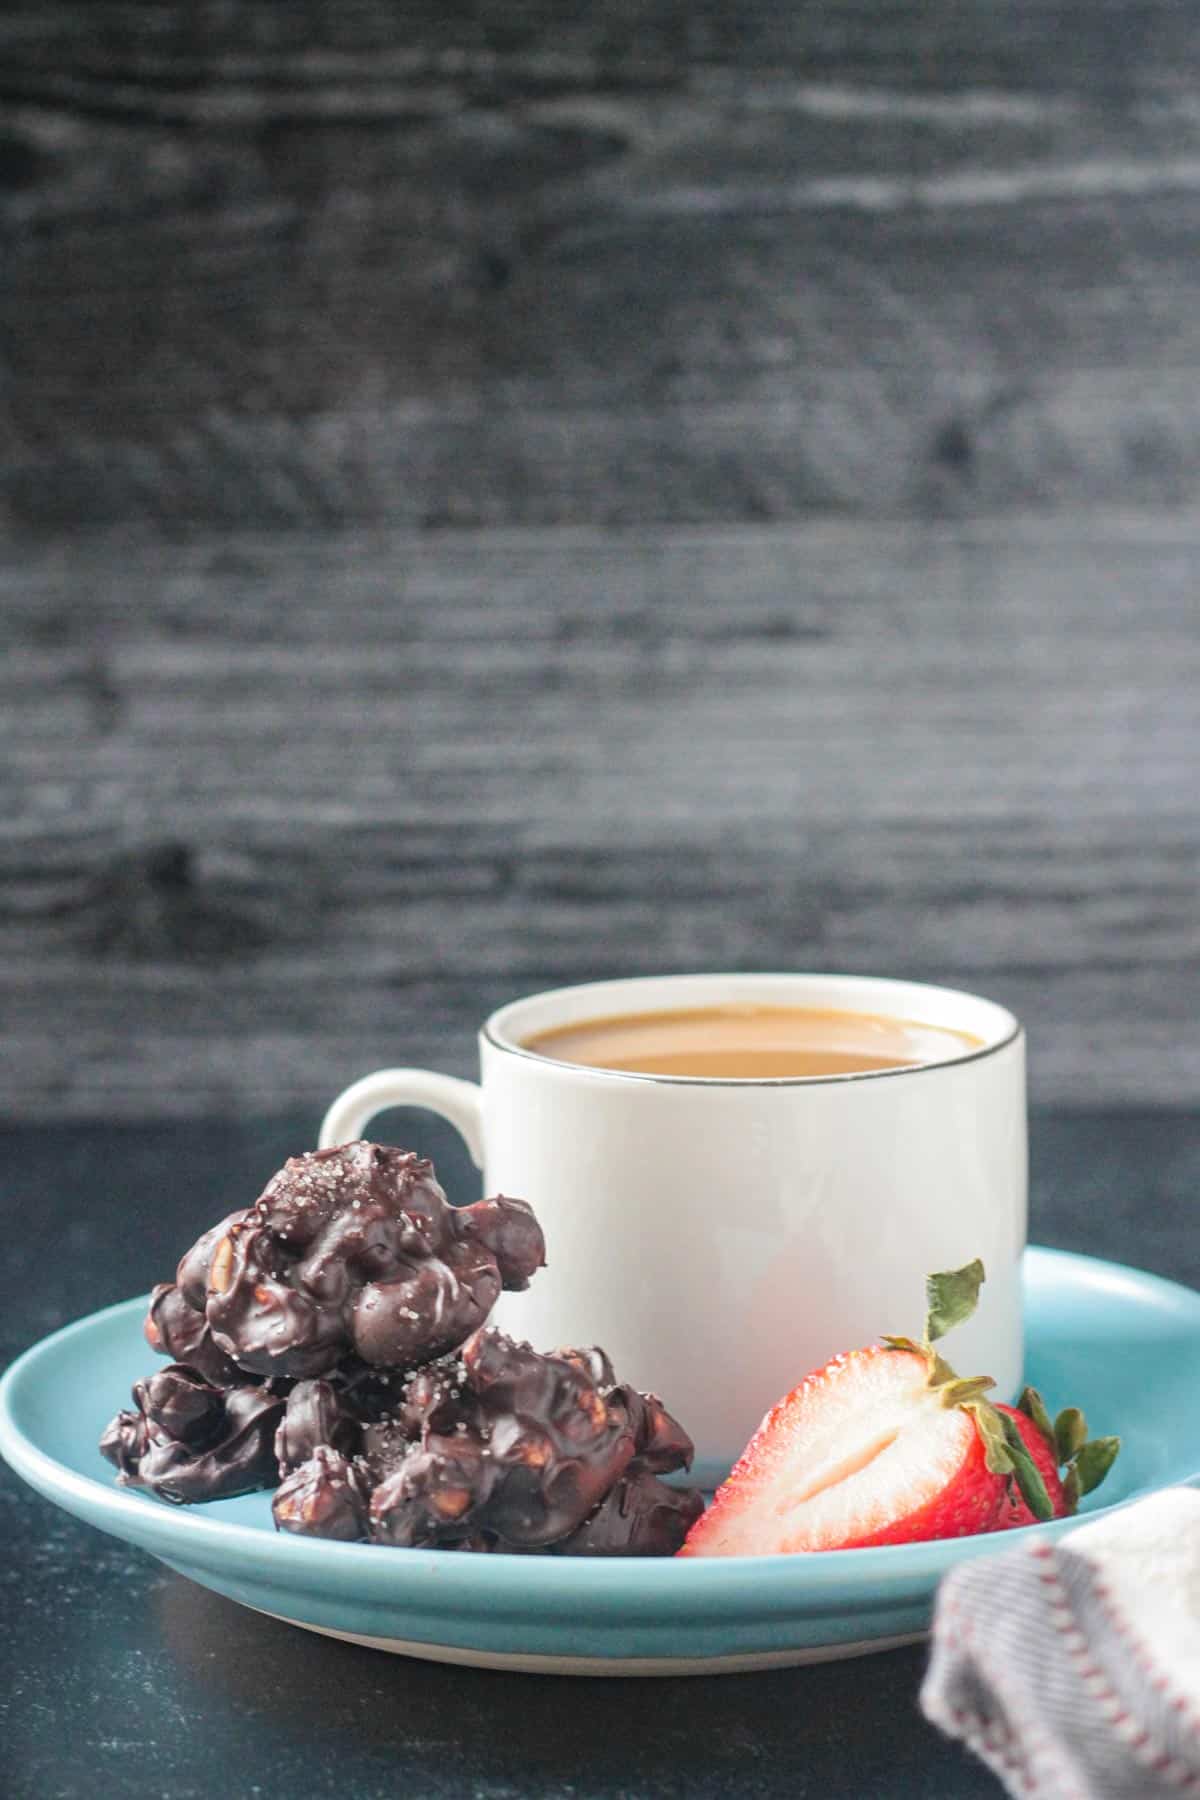 Several nut clusters on a blue plate with a cup of coffee and one strawberry.